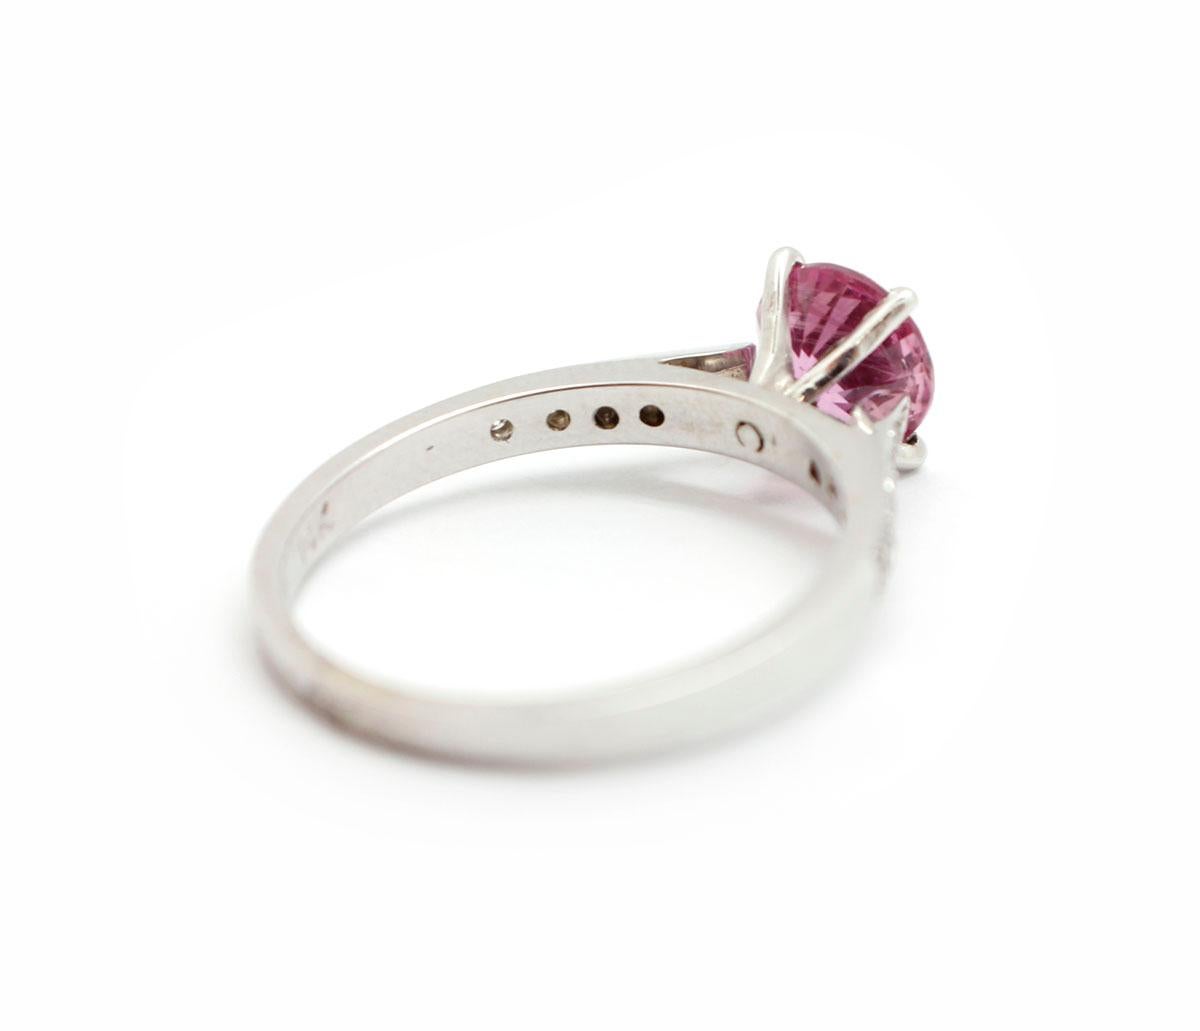 14 Karat White Gold, 1.42 Carat Heated Pink Sapphire and 0.08 Carat Diamond Ring In New Condition For Sale In Scottsdale, AZ